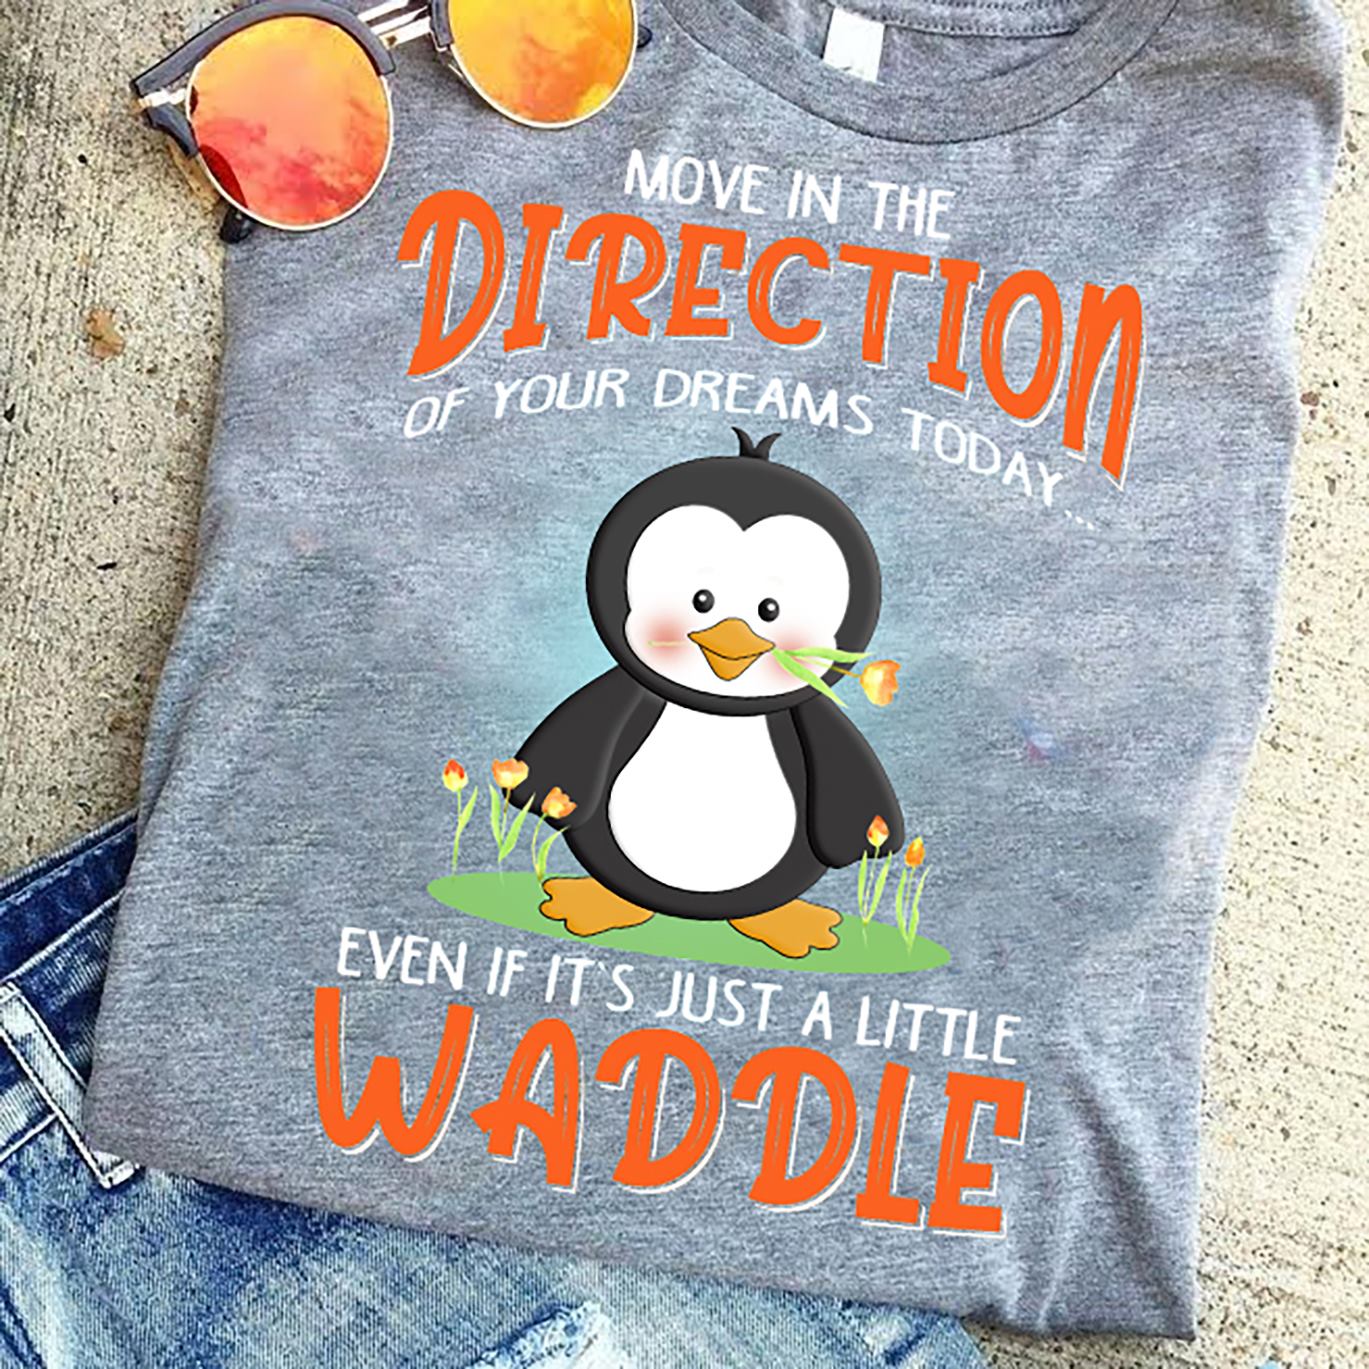 Move in the direction of your dreams today even if it's just a little waddle - Penguin